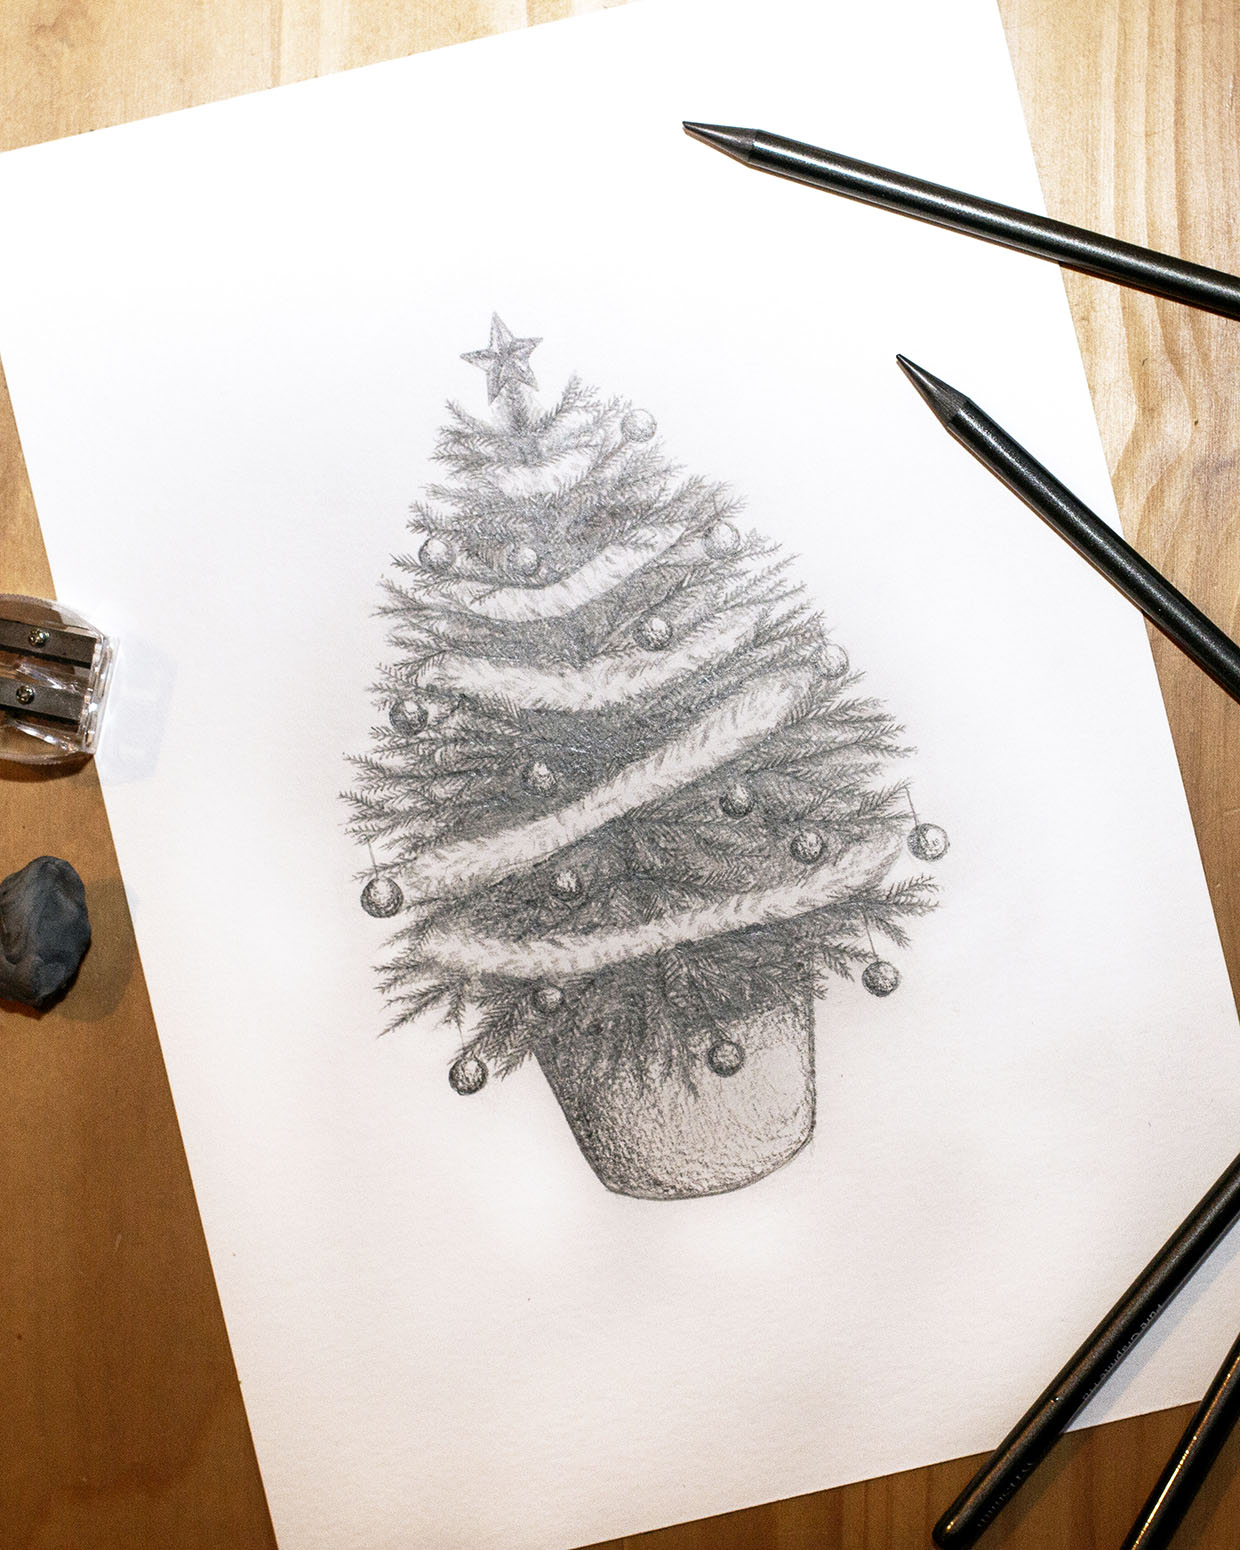 How To Draw Christmas Tree: Easy Guide Book For Drawing With 30 Simple  Pictures Inside | Gifts For Relaxation And Stress Relief: Cisneros, Alan:  9798856926087: Amazon.com: Books